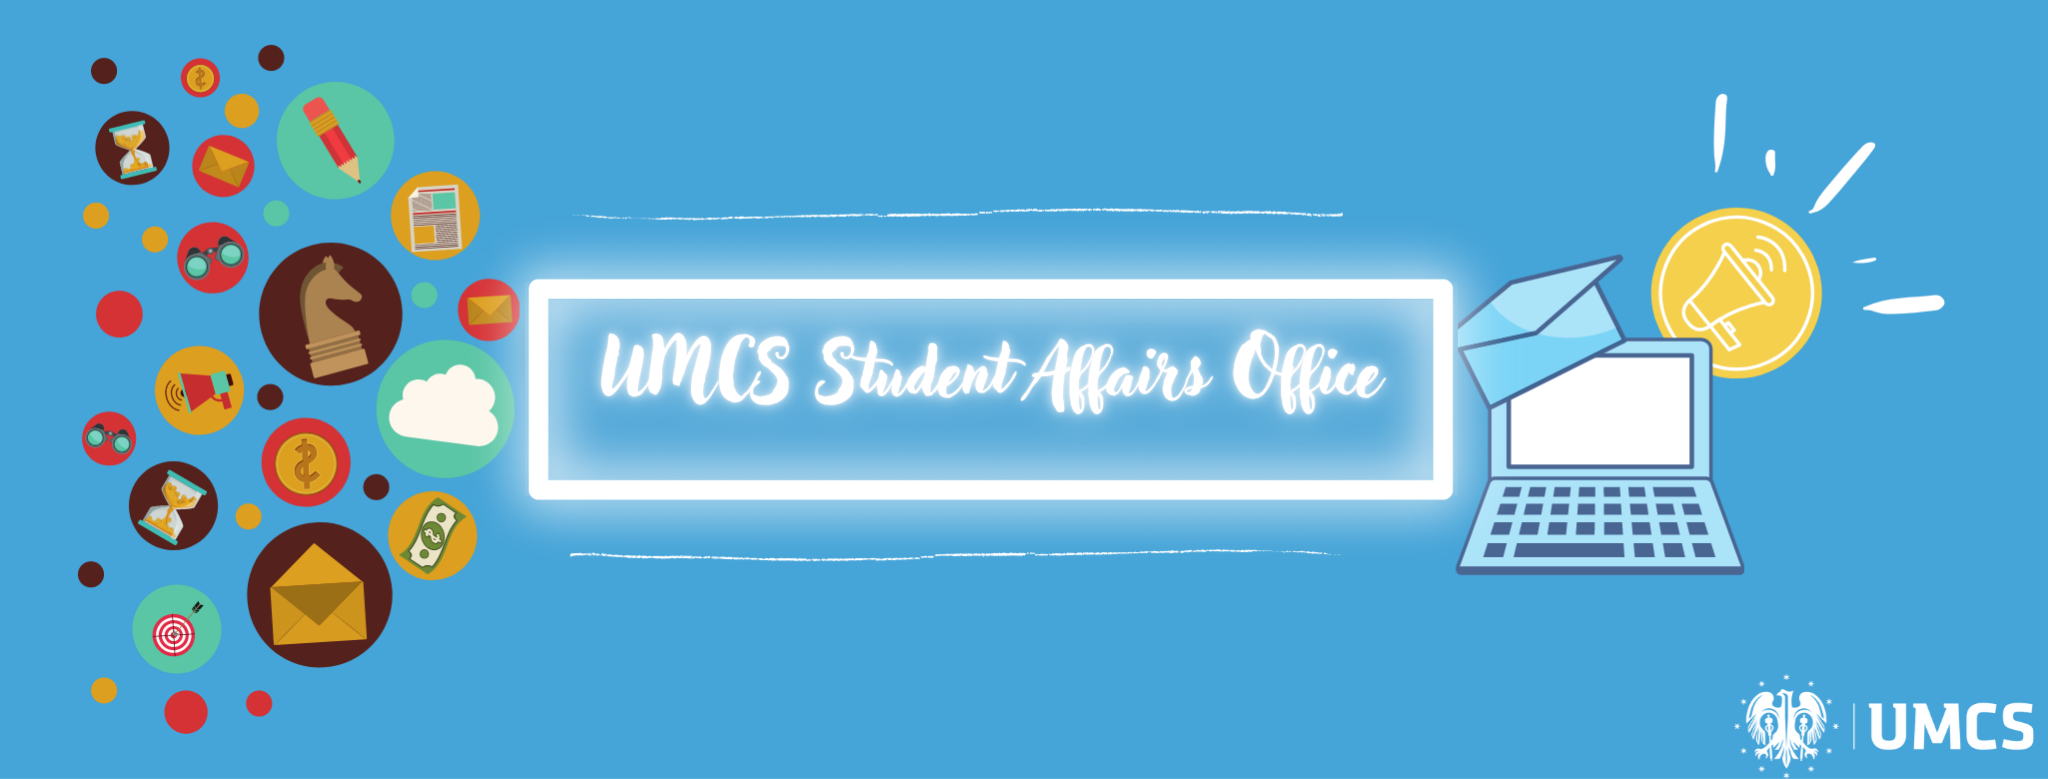 UMCS Student Affairs Office.png